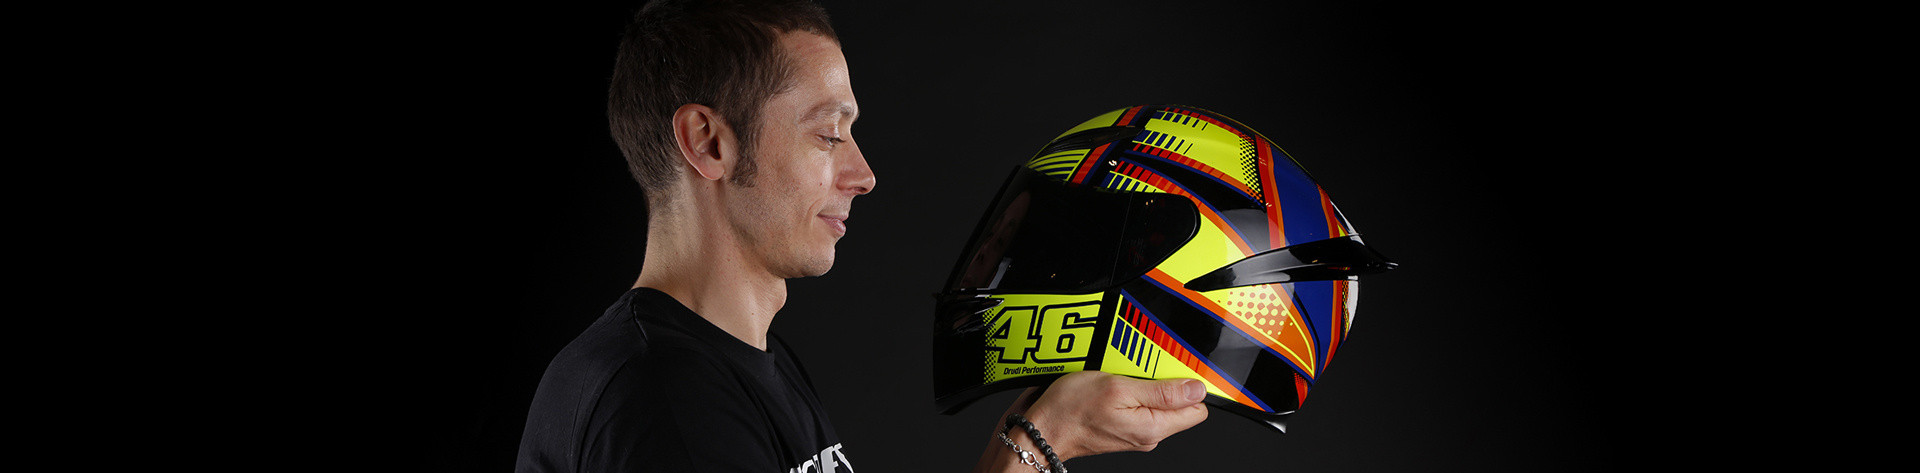 AGV K1 Replica Soleluna 2017: Unleash Your Ride with Style and Protection